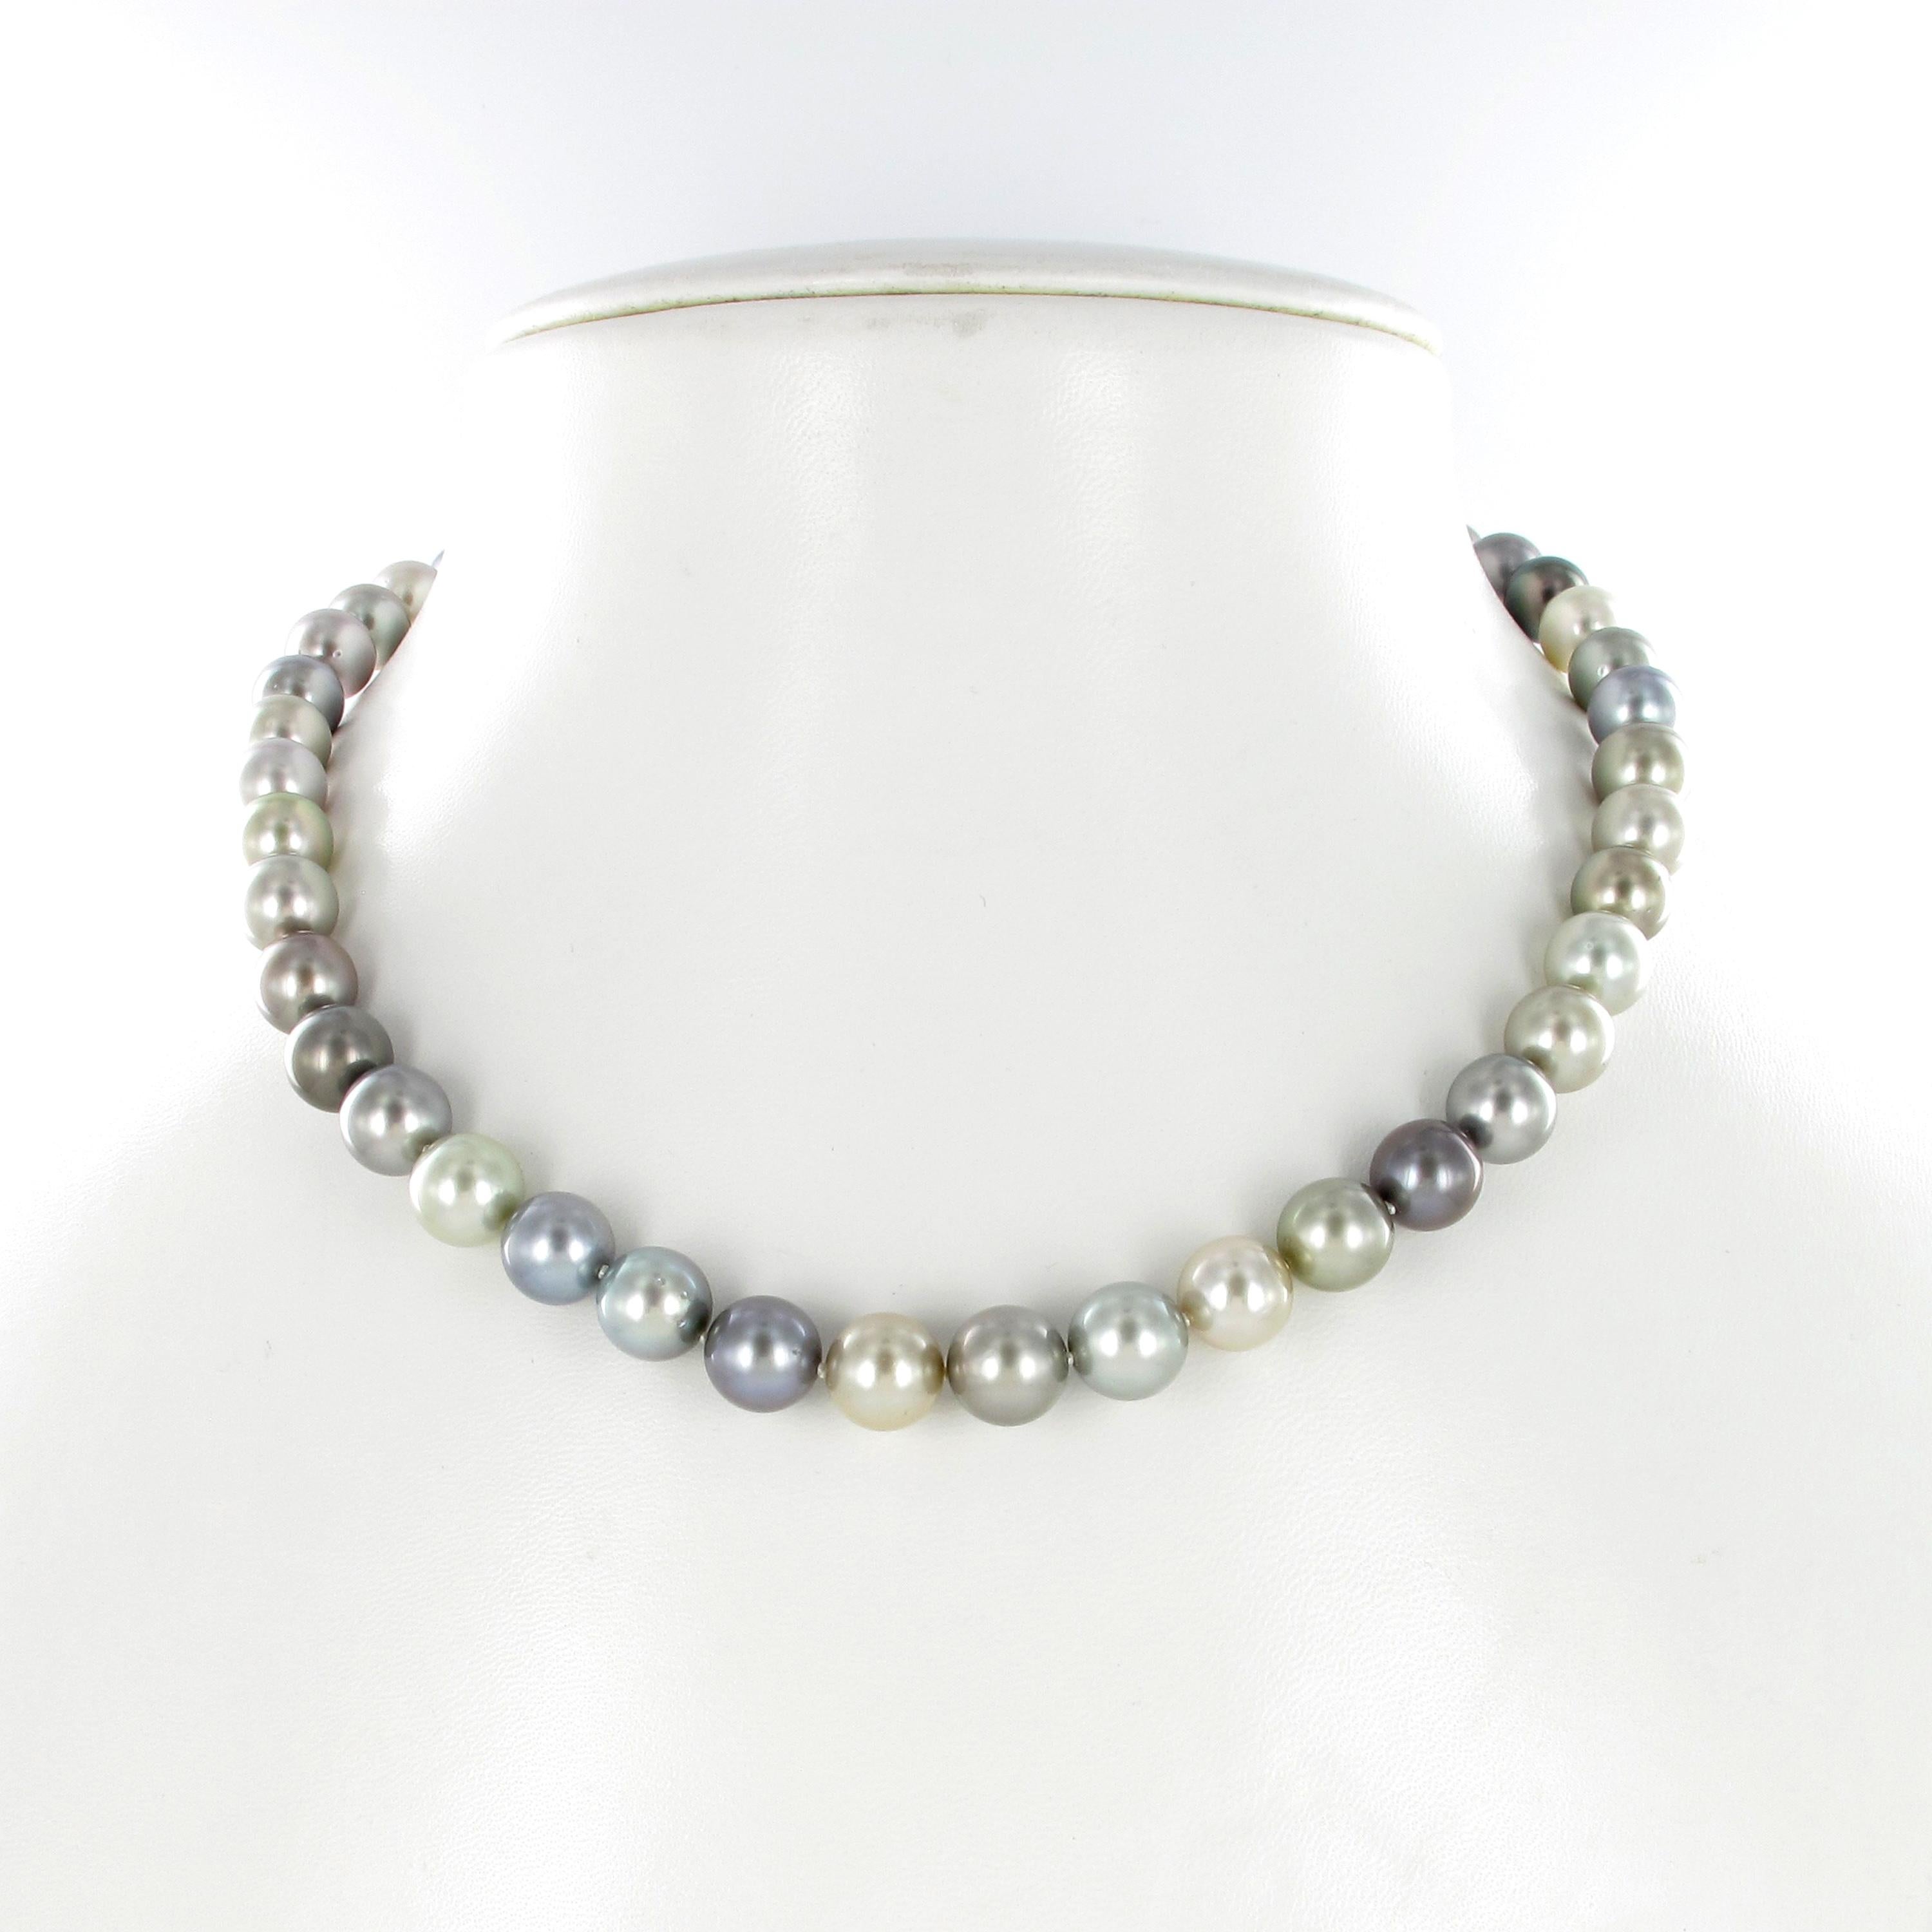 This strand consists of 44 round to slightly round multicolored Tahitian cultured pearls graduating from 9.0 mm to 10.0 mm. The different body colors range from very light gray to a mid light gray with purplish and bluish overtones. The overwhole